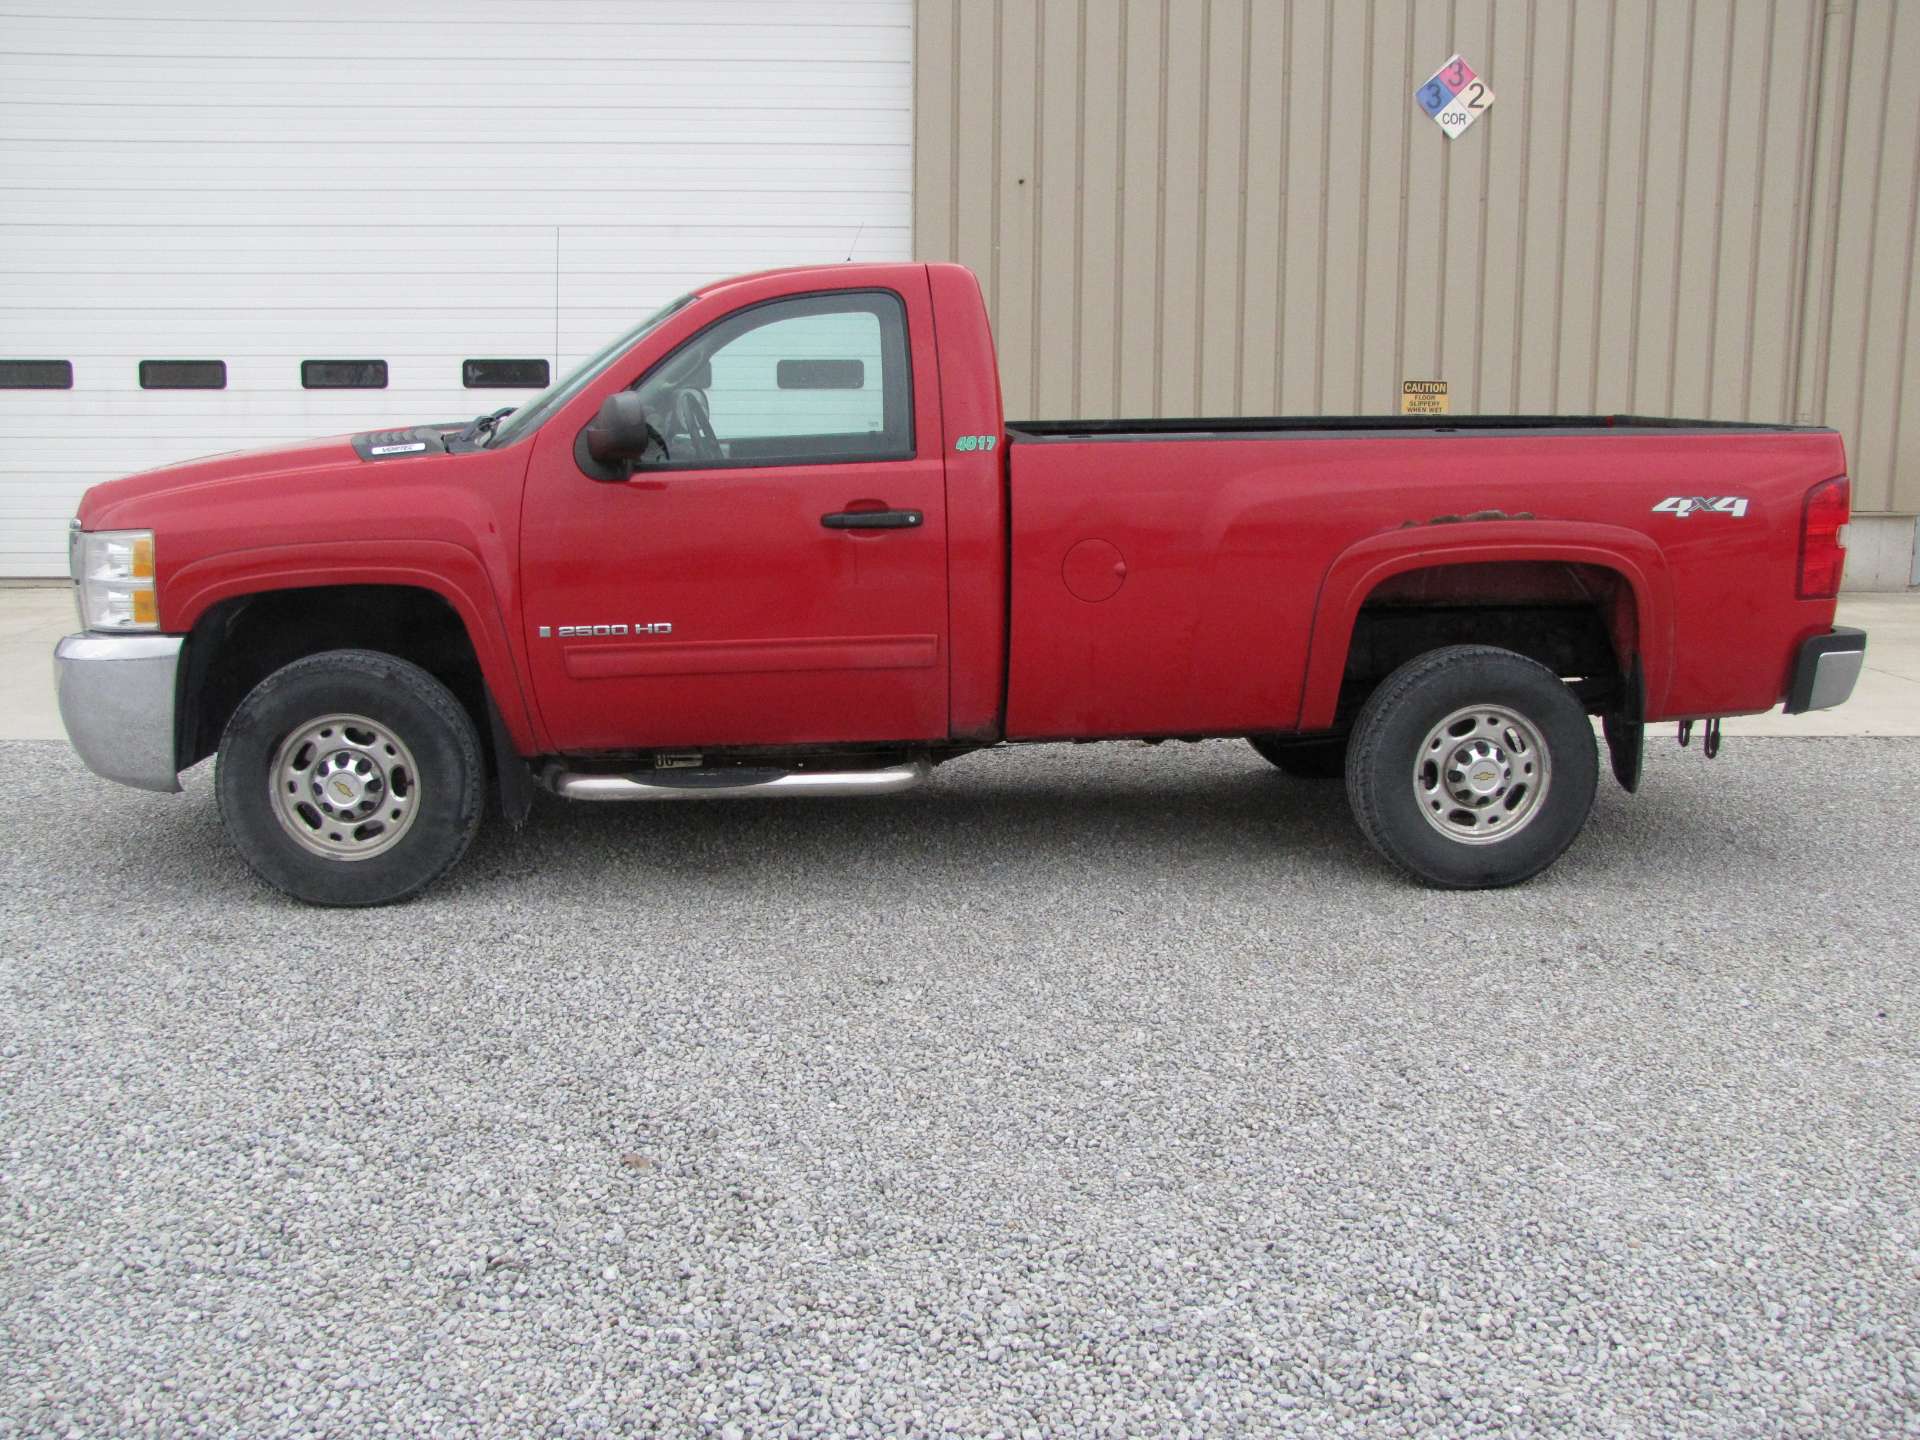 2009 Chevy 2500 HD LT pickup truck - Image 4 of 69